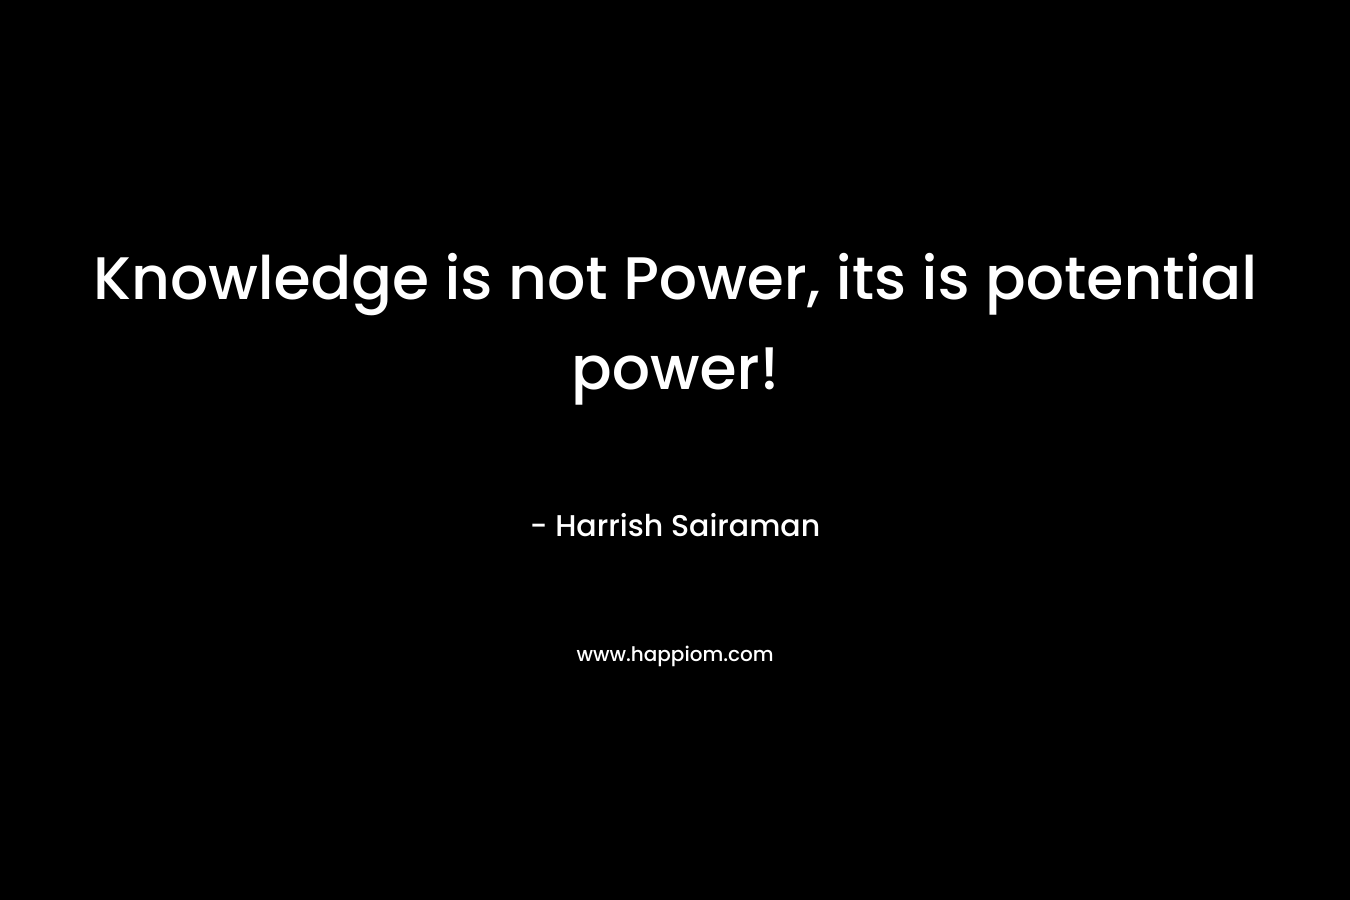 Knowledge is not Power, its is potential power!